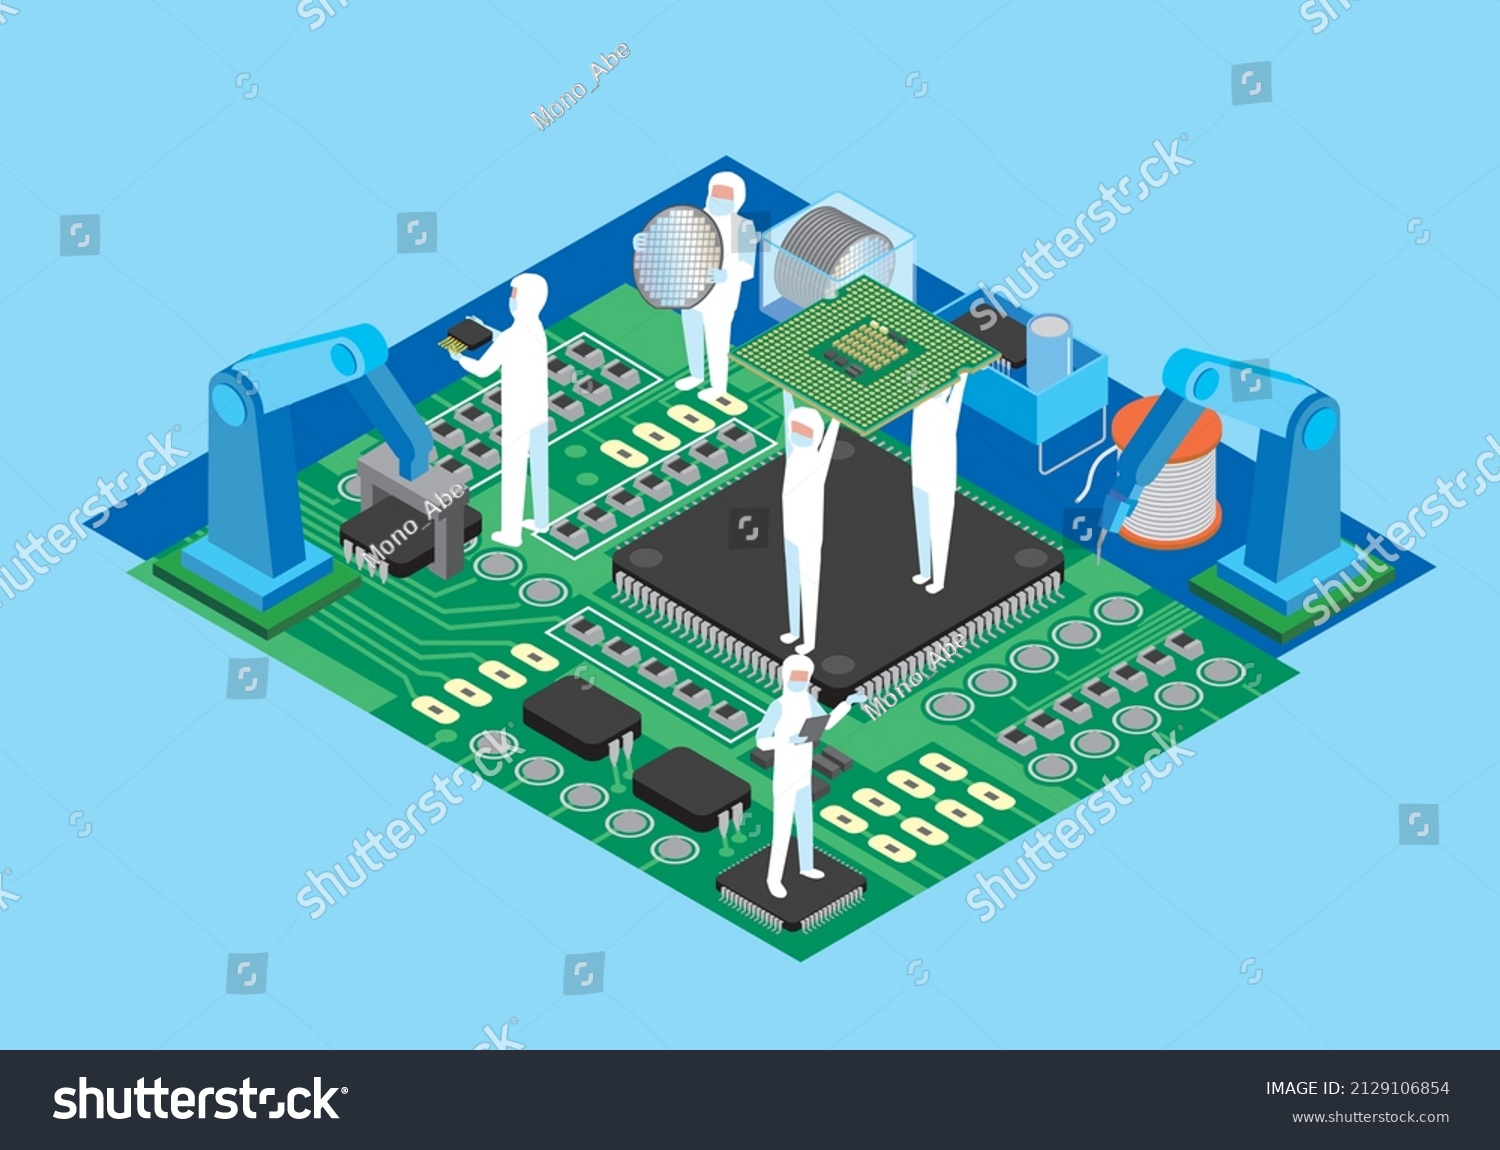 SVG of Isometric image of semiconductor electronic component manufacturing factory svg